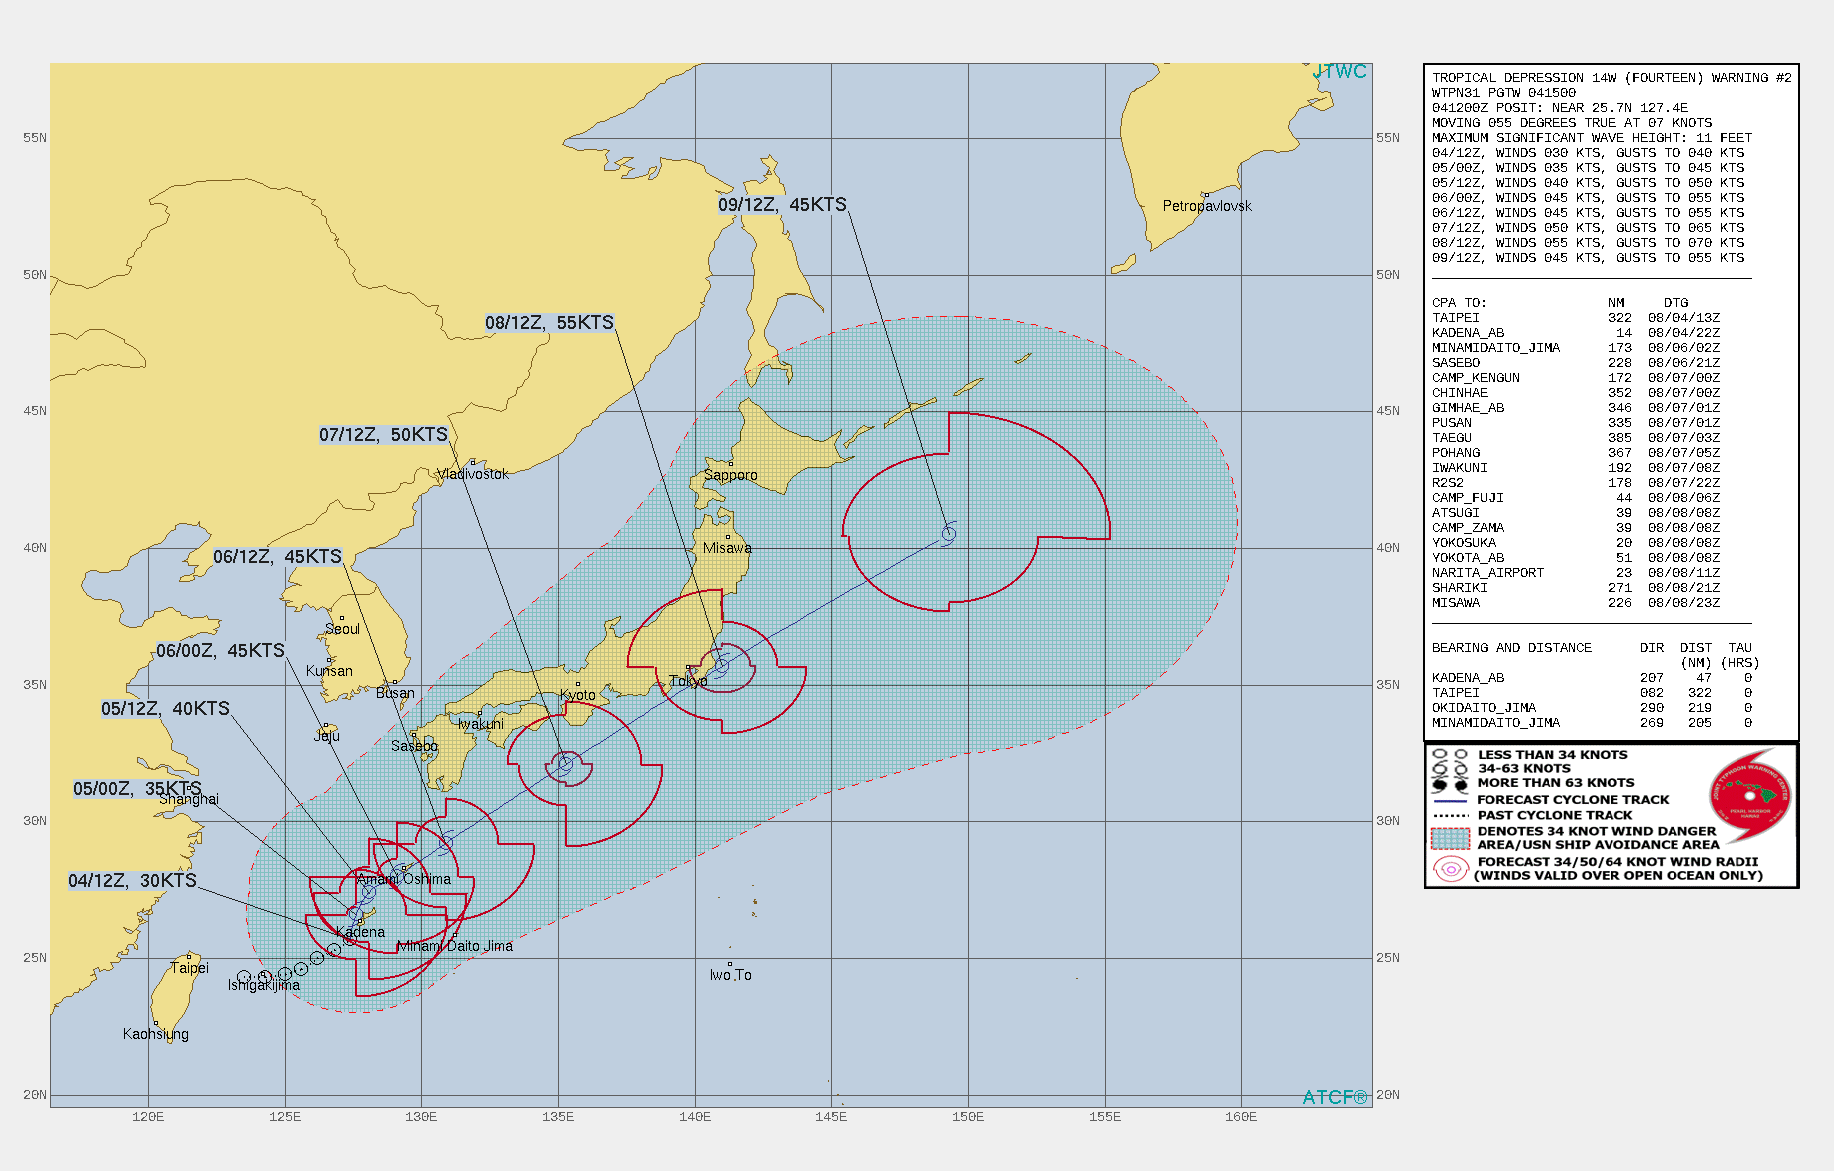 TD 14W. WARNING 2 ISSUED AT 04/15UTC.THERE ARE NO SIGNIFICANT CHANGES TO THE FORECAST FROM THE PREVIOUS WARNING.  FORECAST DISCUSSION: AS TD 14W WILL TRACK NORTHWARD UP TO 12H AS THE STEERING MECHANISM  SWITCHES TO A BUILDING SUBTROPICAL RIDGE (STR) TO THE EAST AND WILL BECOME THE PRIMARY STEERING FORCE THROUGHOUT THE FORECAST. AFTER 12H, IT WILL TURN NORTHEASTWARD AS THE STR REORIENTS AND EXTENDS SOUTHWESTWARD. BY 120H, TD 14W WILL BE APPROXIMATELY 455KM SOUTHEAST OF HOKKAIDO, JAPAN. THE FAVORABLE ENVIRONMENT WILL FUEL STEADY INTENSIFICATION TO A PEAK OF 55KNOTS BY 96H AS THE SYSTEM PASSES TO THE SOUTH OF TOKYO. AFTERWARD, INCREASING VERTICAL WIND SHEAR AND COOLING SSTS WILL WEAKEN THE SYSTEM DOWN TO 45KNOTS BY 120H. CONCURRENTLY BY 120H, THE SYSTEM WILL BEGIN EXTRA-TROPICAL TRANSITION AS IT ENTERS THE BAROCLINIC ZONE.